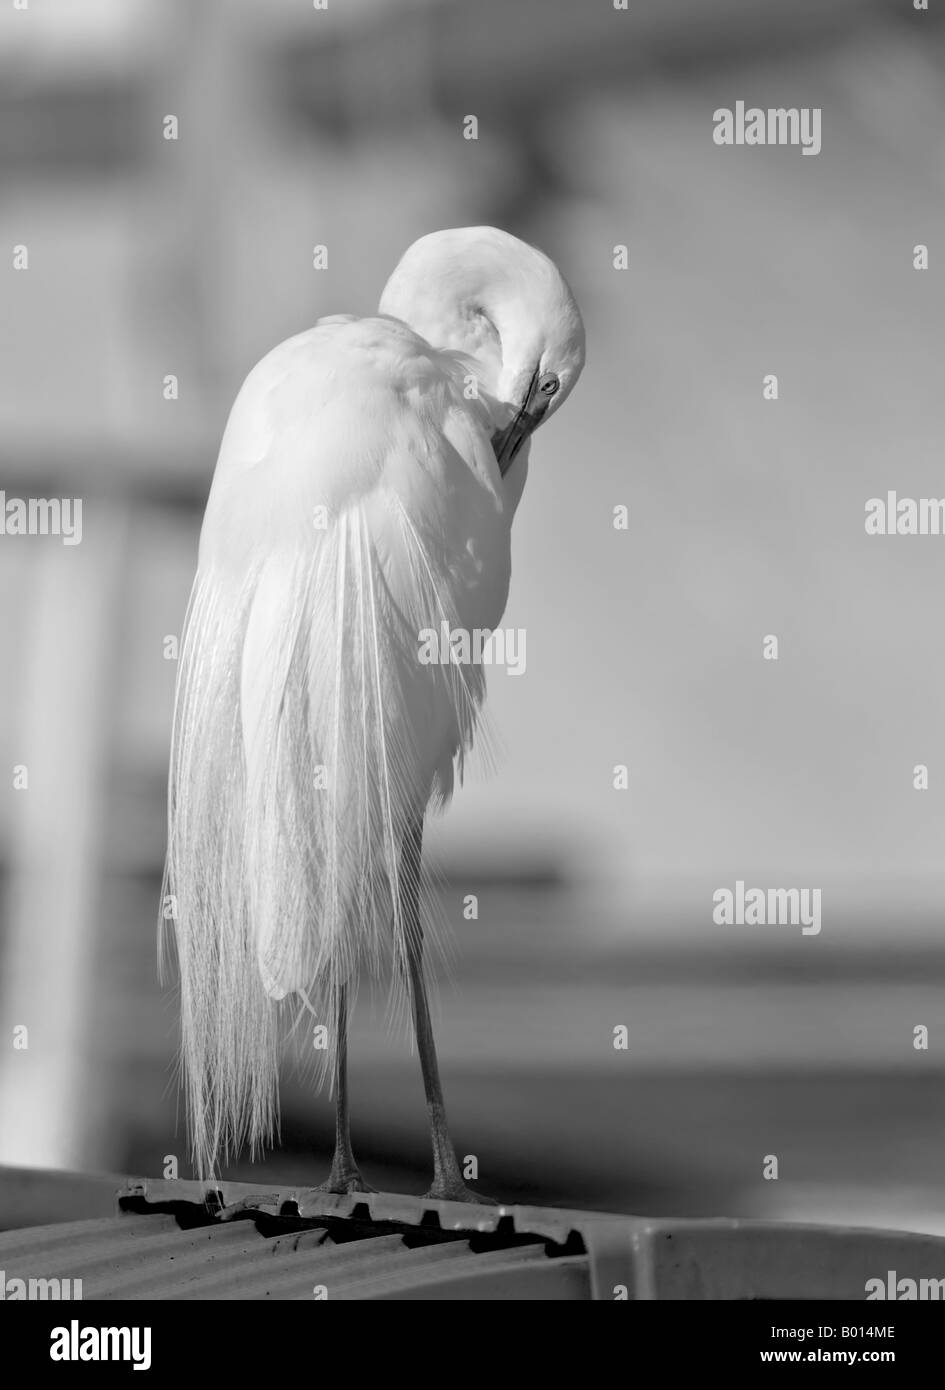 Great White Egret with head tucked under wing, preparing for a long winter's nap.  Stock Photography by cahyman. Stock Photo